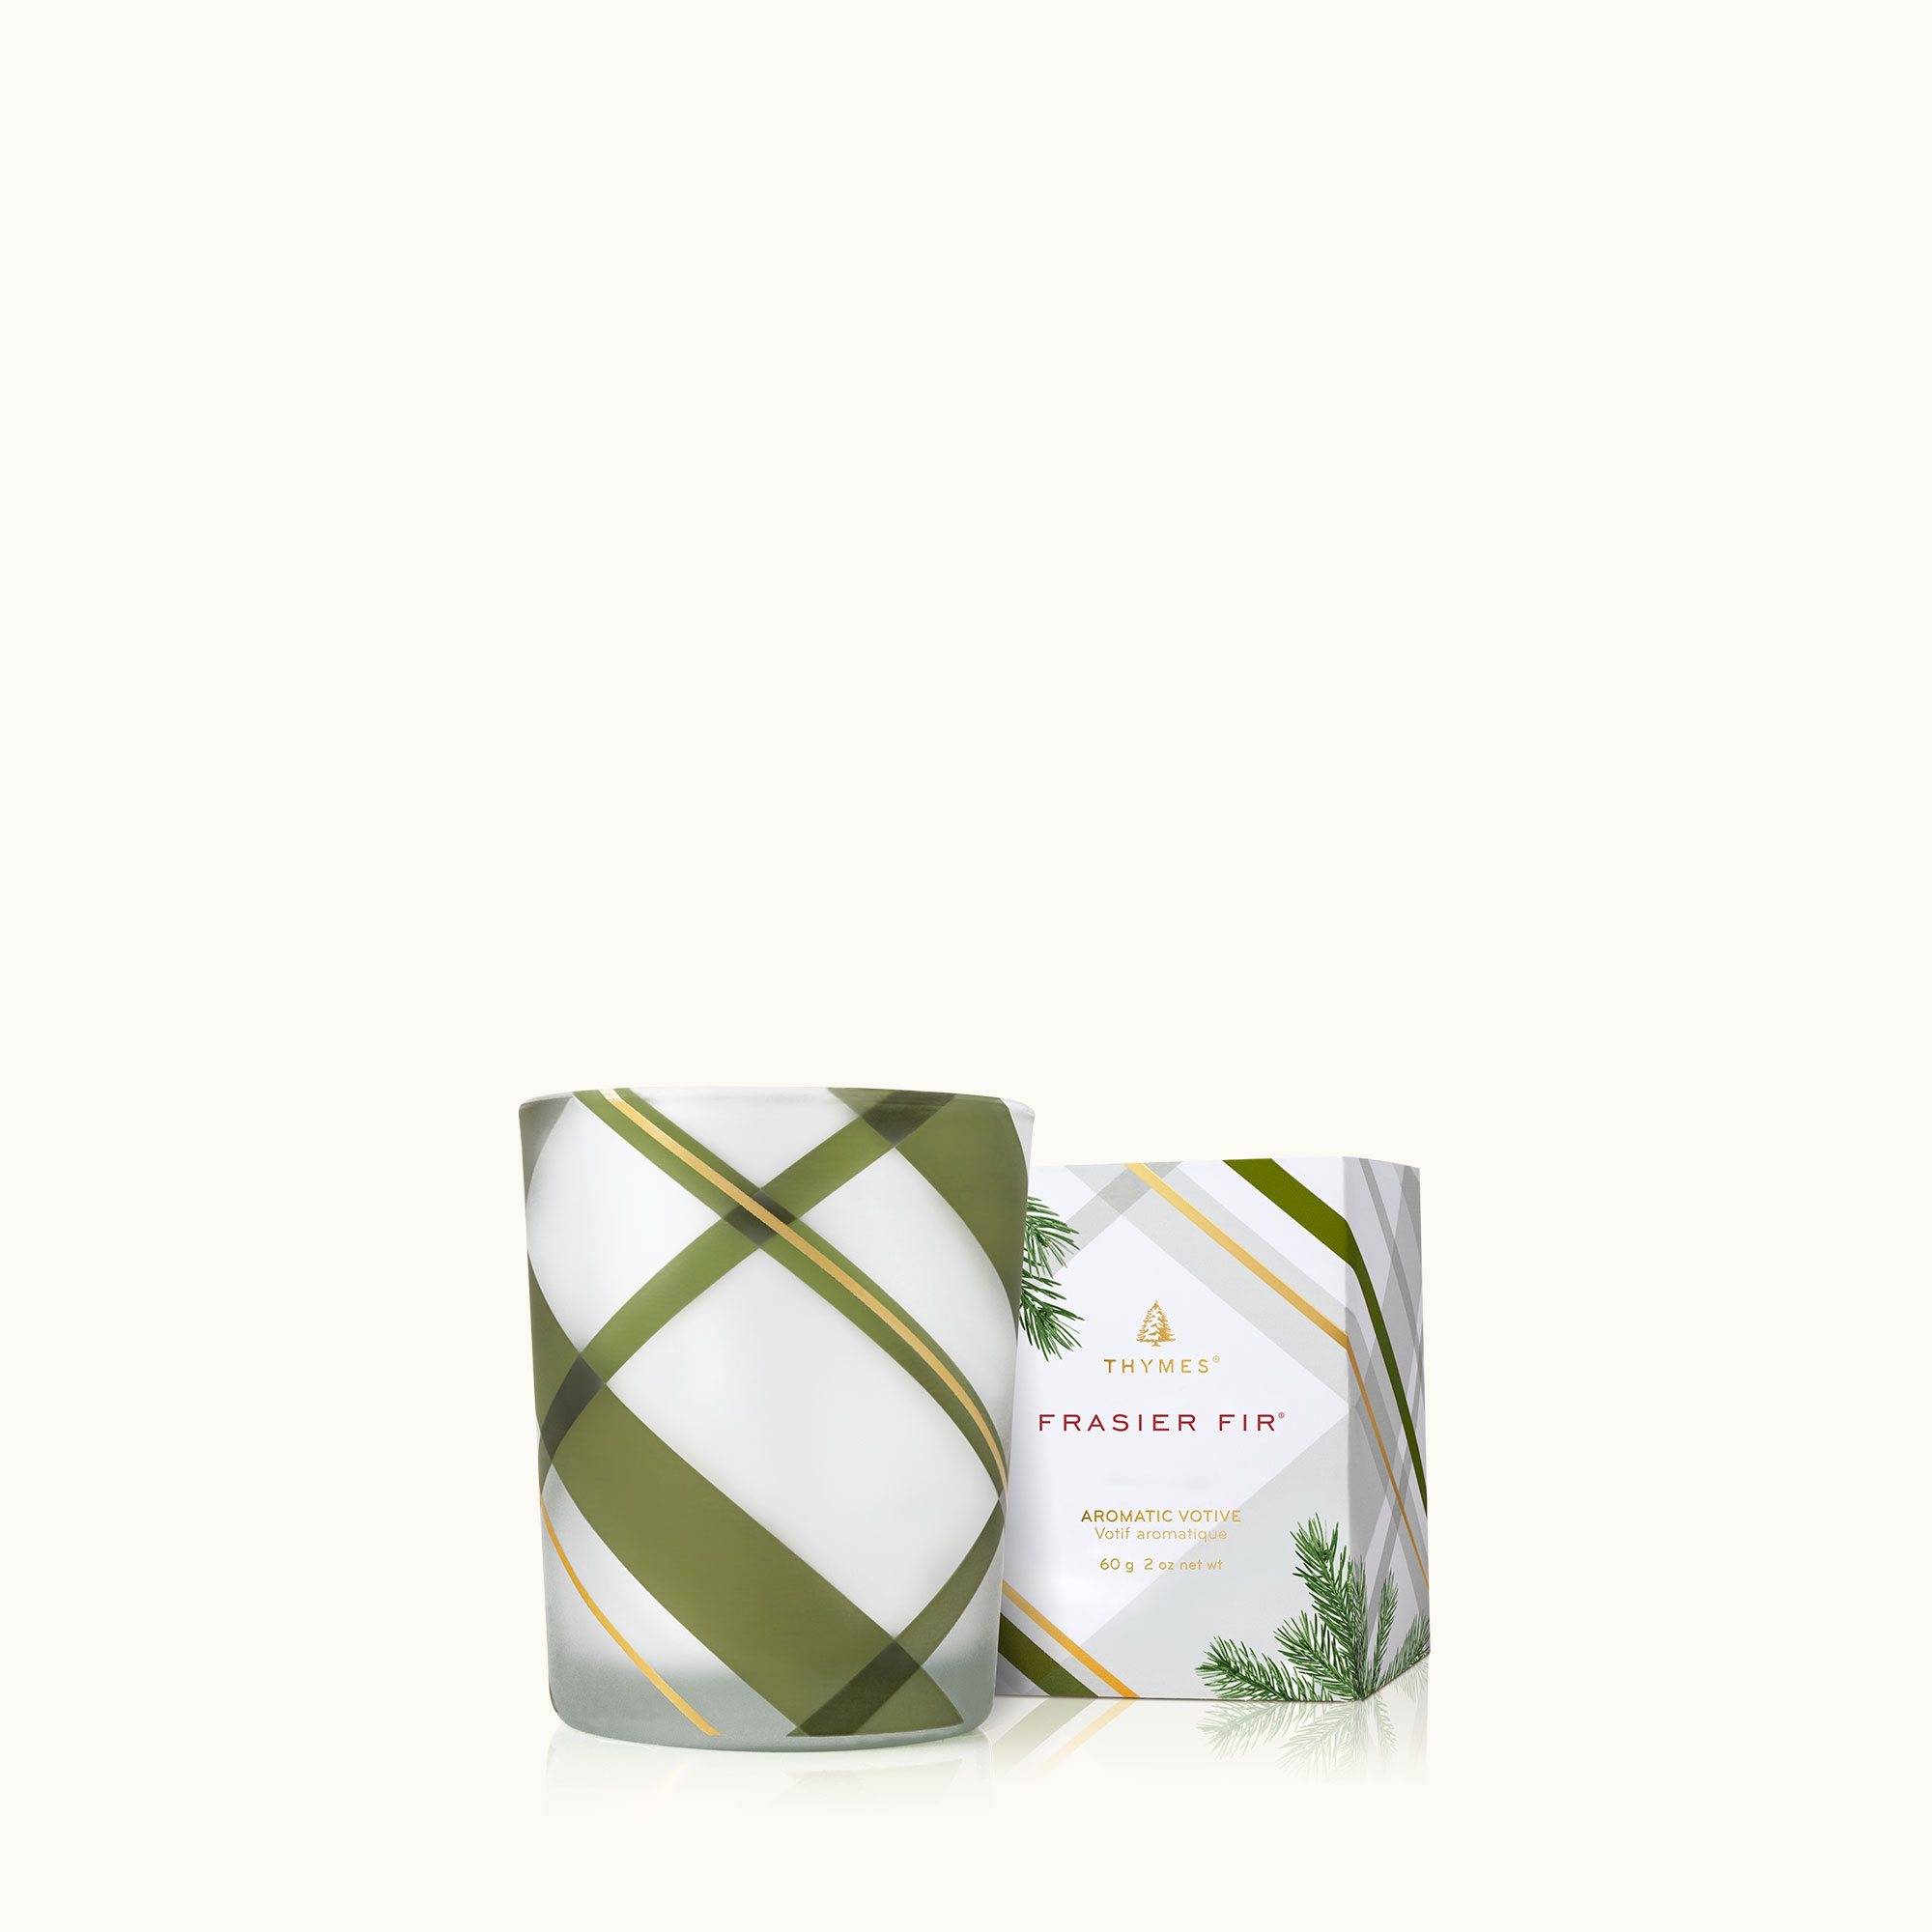 If you are looking for Frasier Fir candles… RUN!!! They are flying